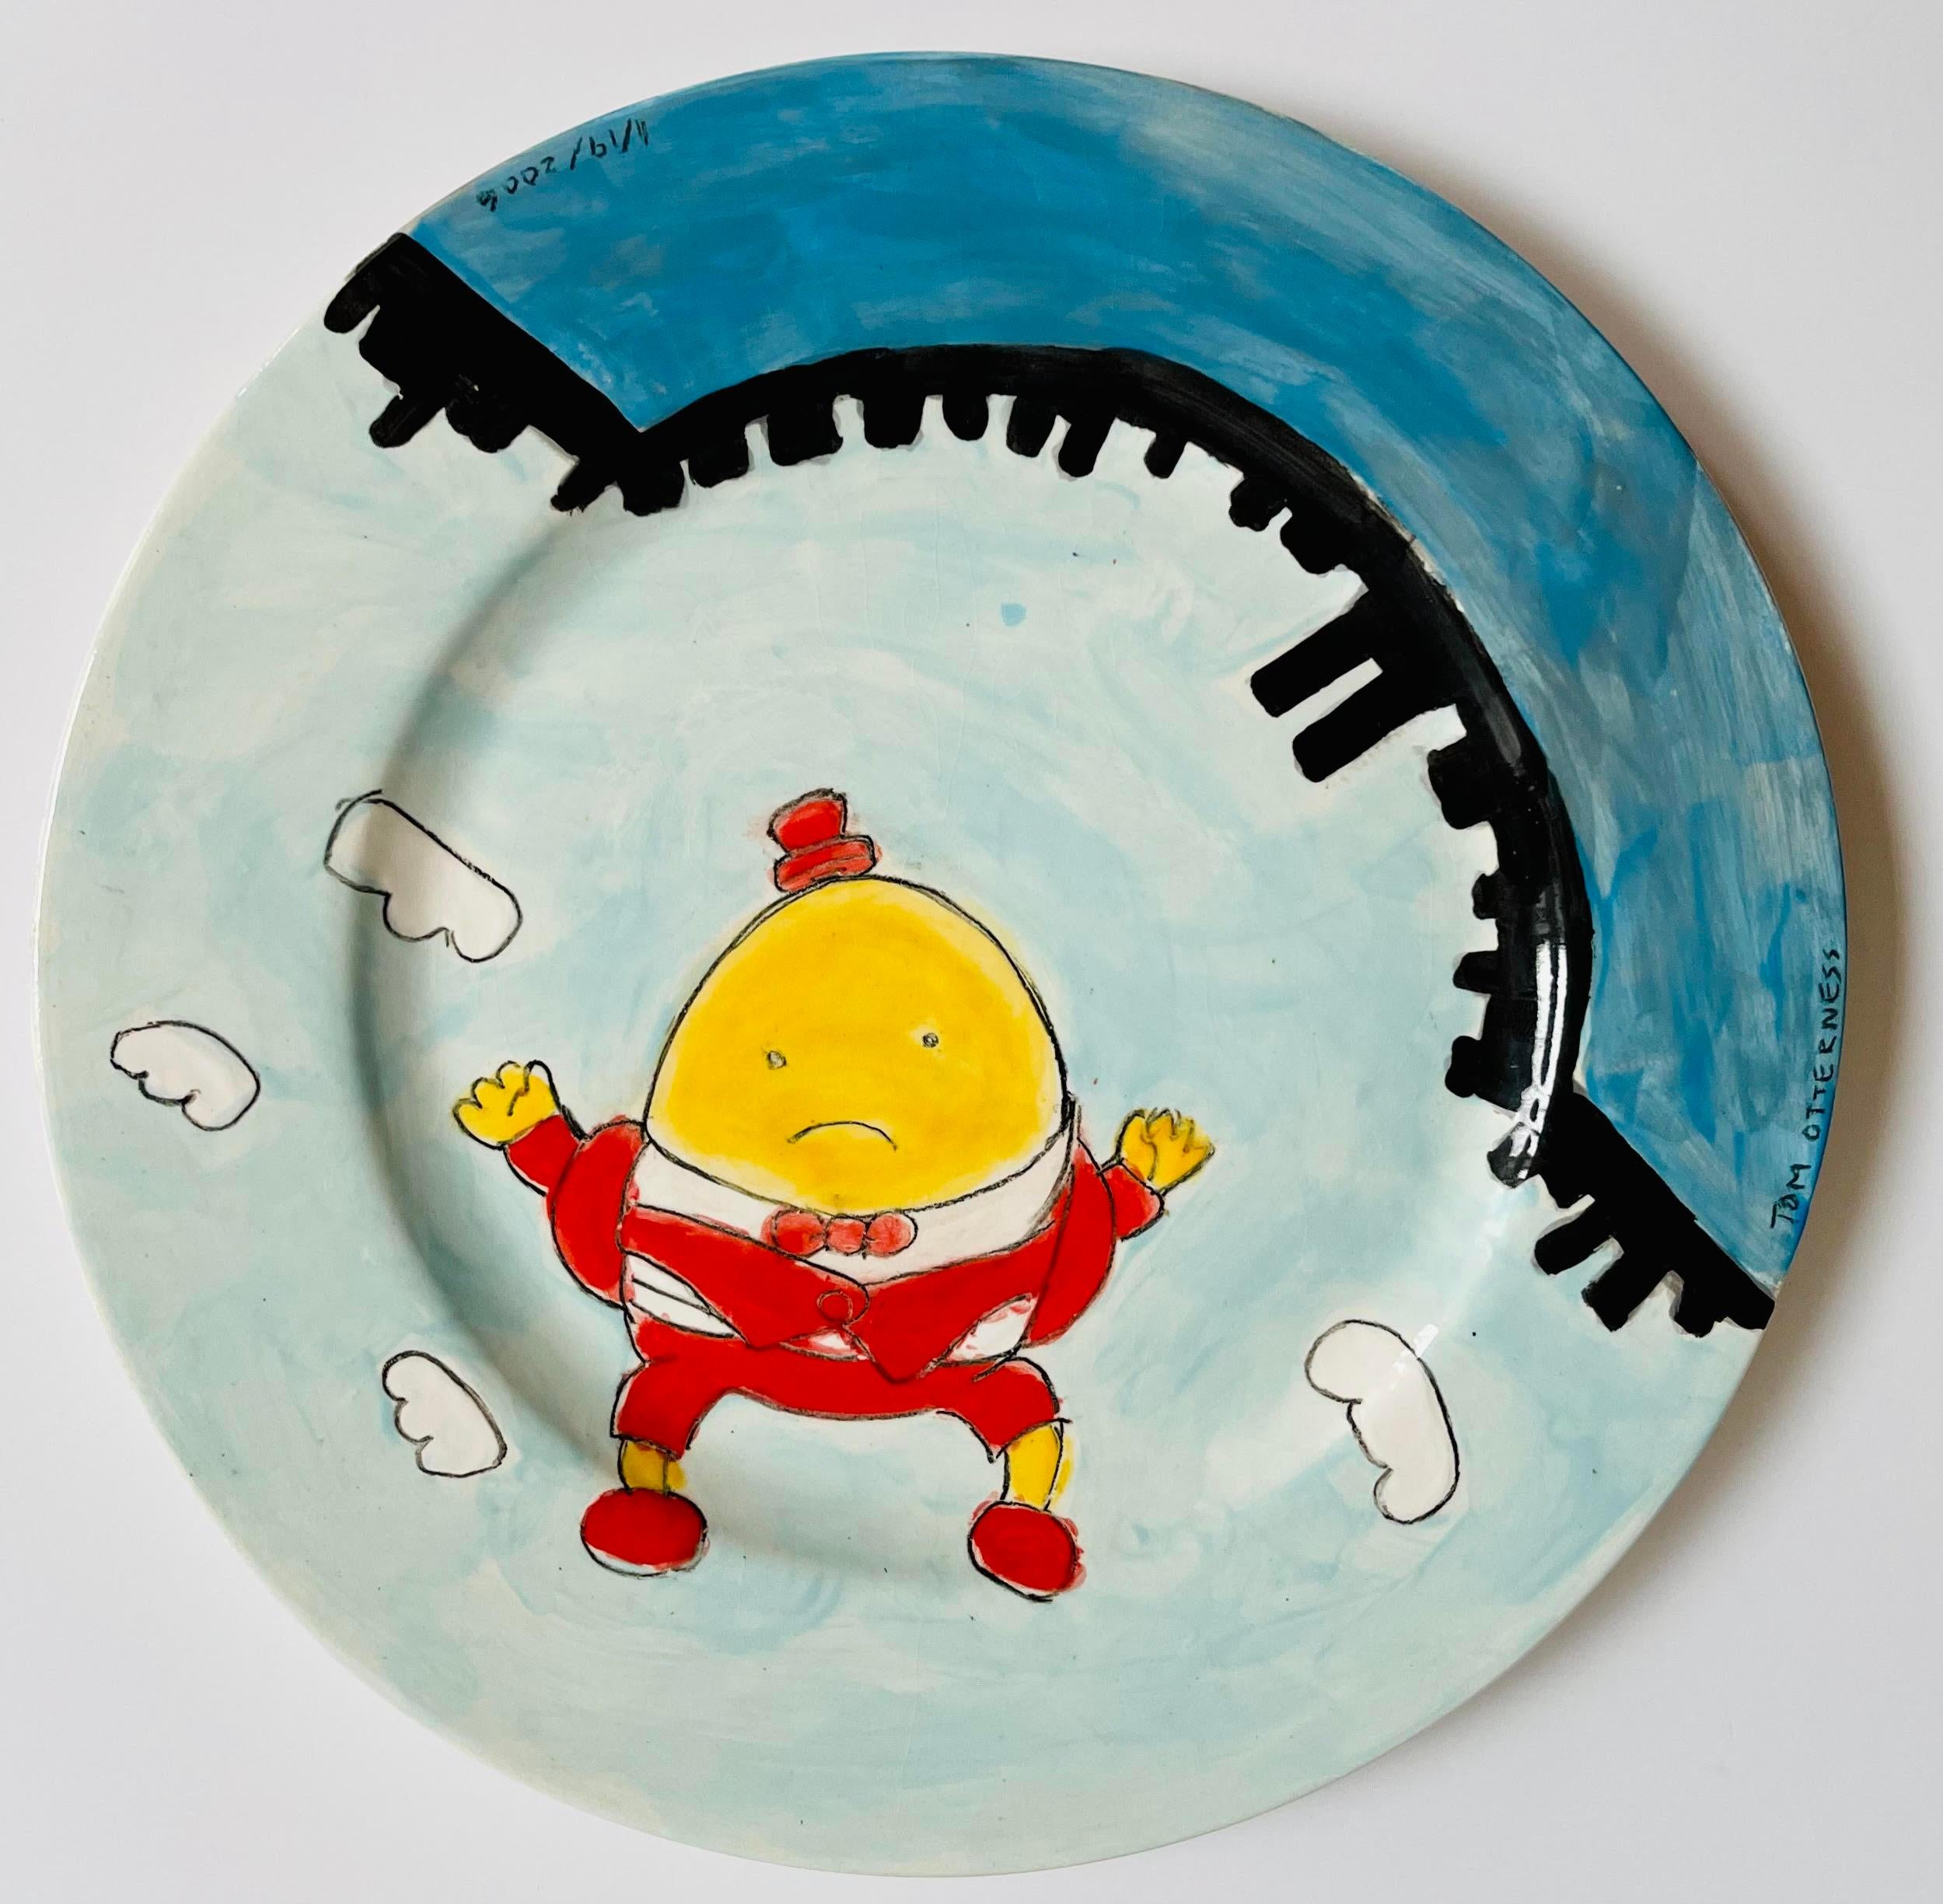 Macy's Humpty Dumpty unique, signed Ceramic Plate by famed sculptor iconic image - Pop Art Mixed Media Art by Tom Otterness